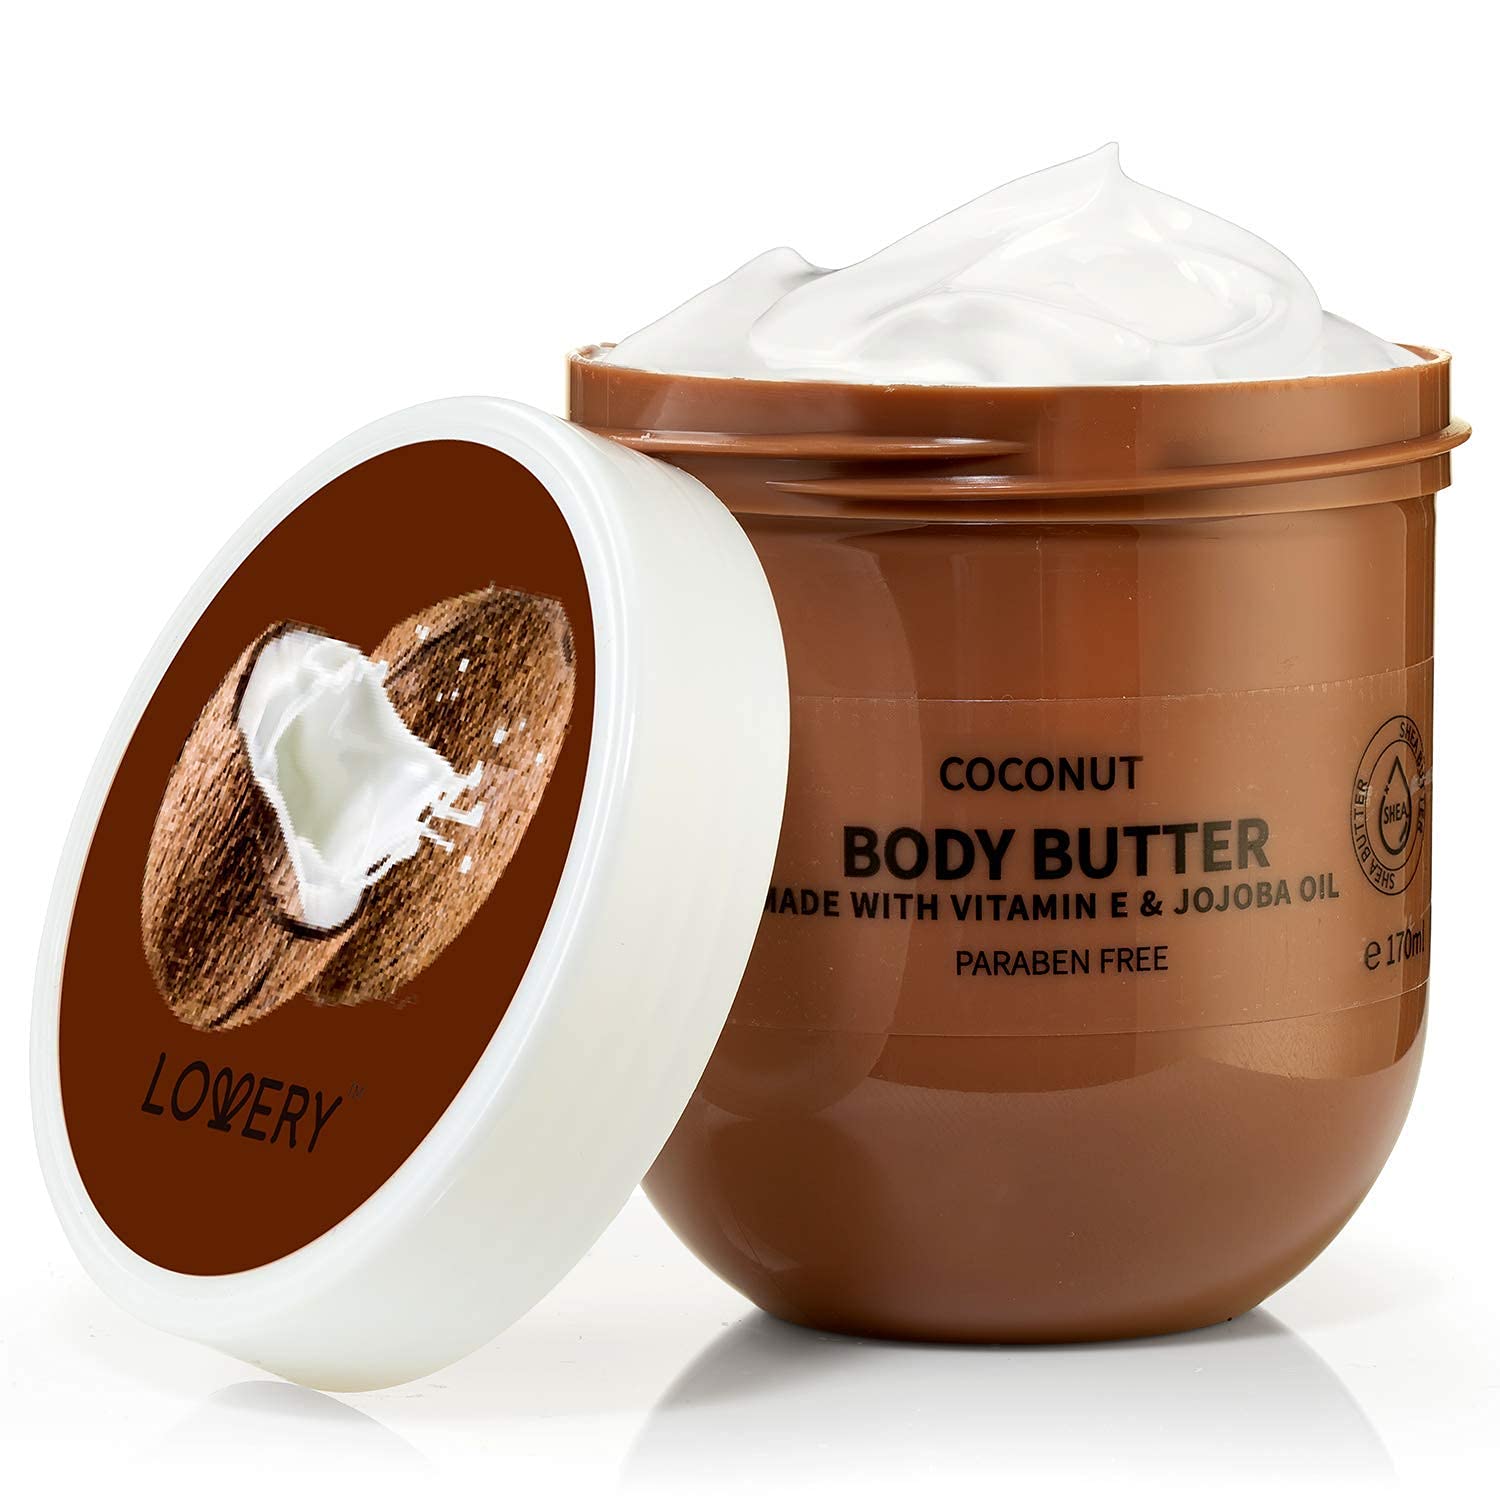 Body Butter Scented Body Lotion Coconut Body Butter Cream for Sensitive, Dry Skin - 6oz Hydrating Moisturizer with Pure Shea Butter for Nourishing Body Care